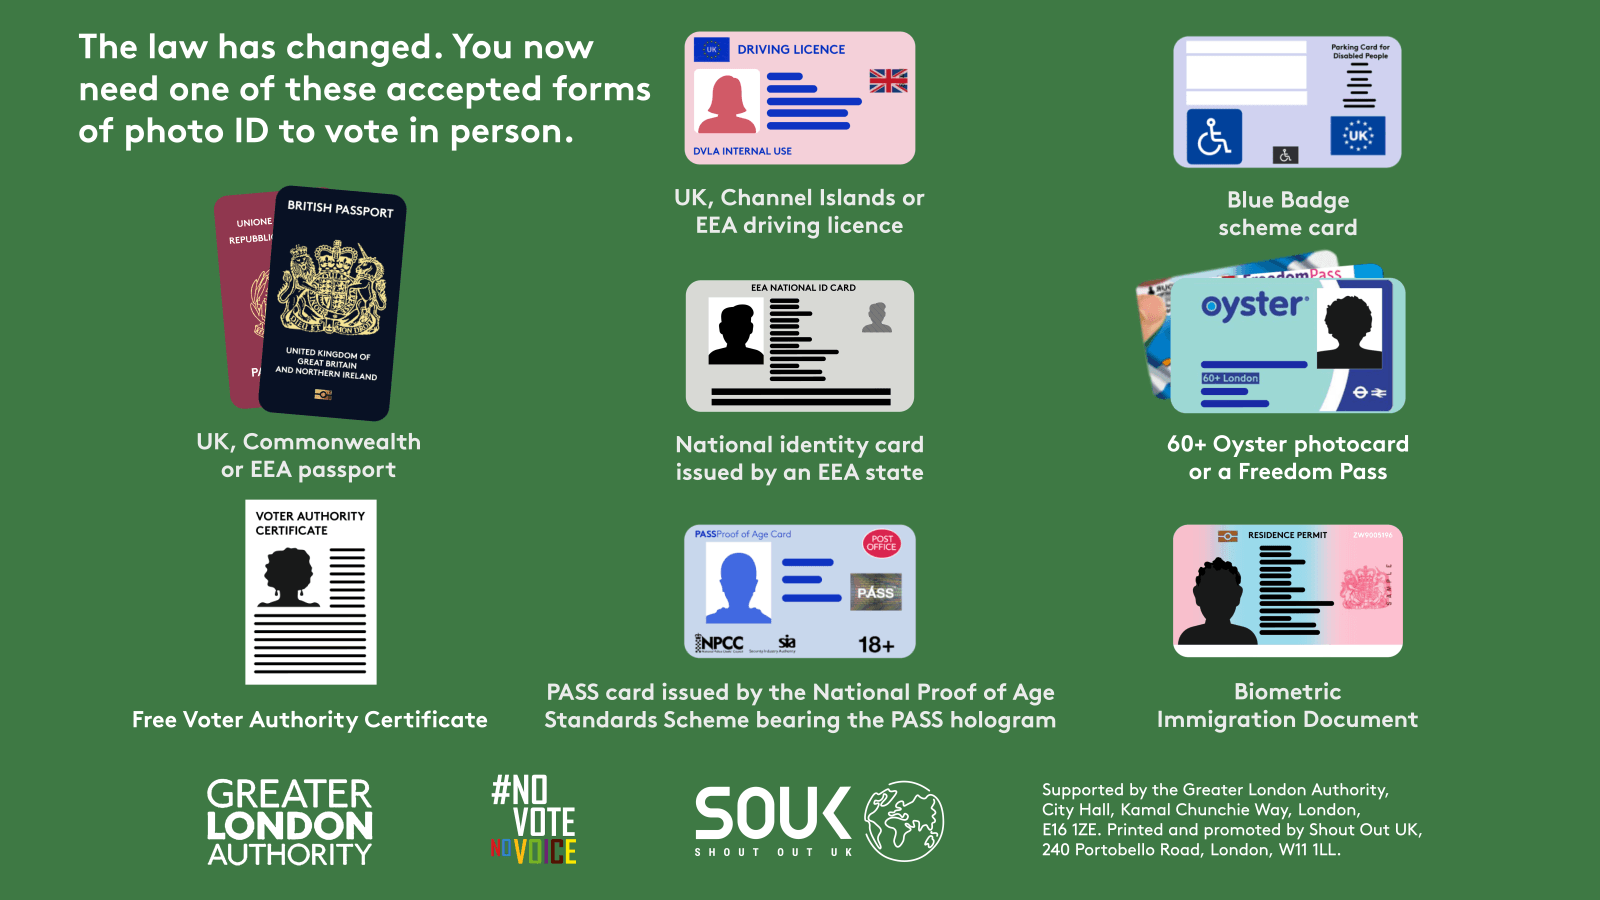 This image shows a list of photographic identification including a UK or EEA passport; a UK, EEA or Commonwealth driving licence; a Blue Badge and Freedom Pass, a free Voter Authority Certificate, and others, with the text “The law has changed. You now need one of these accepted forms of photo ID to vote in person.